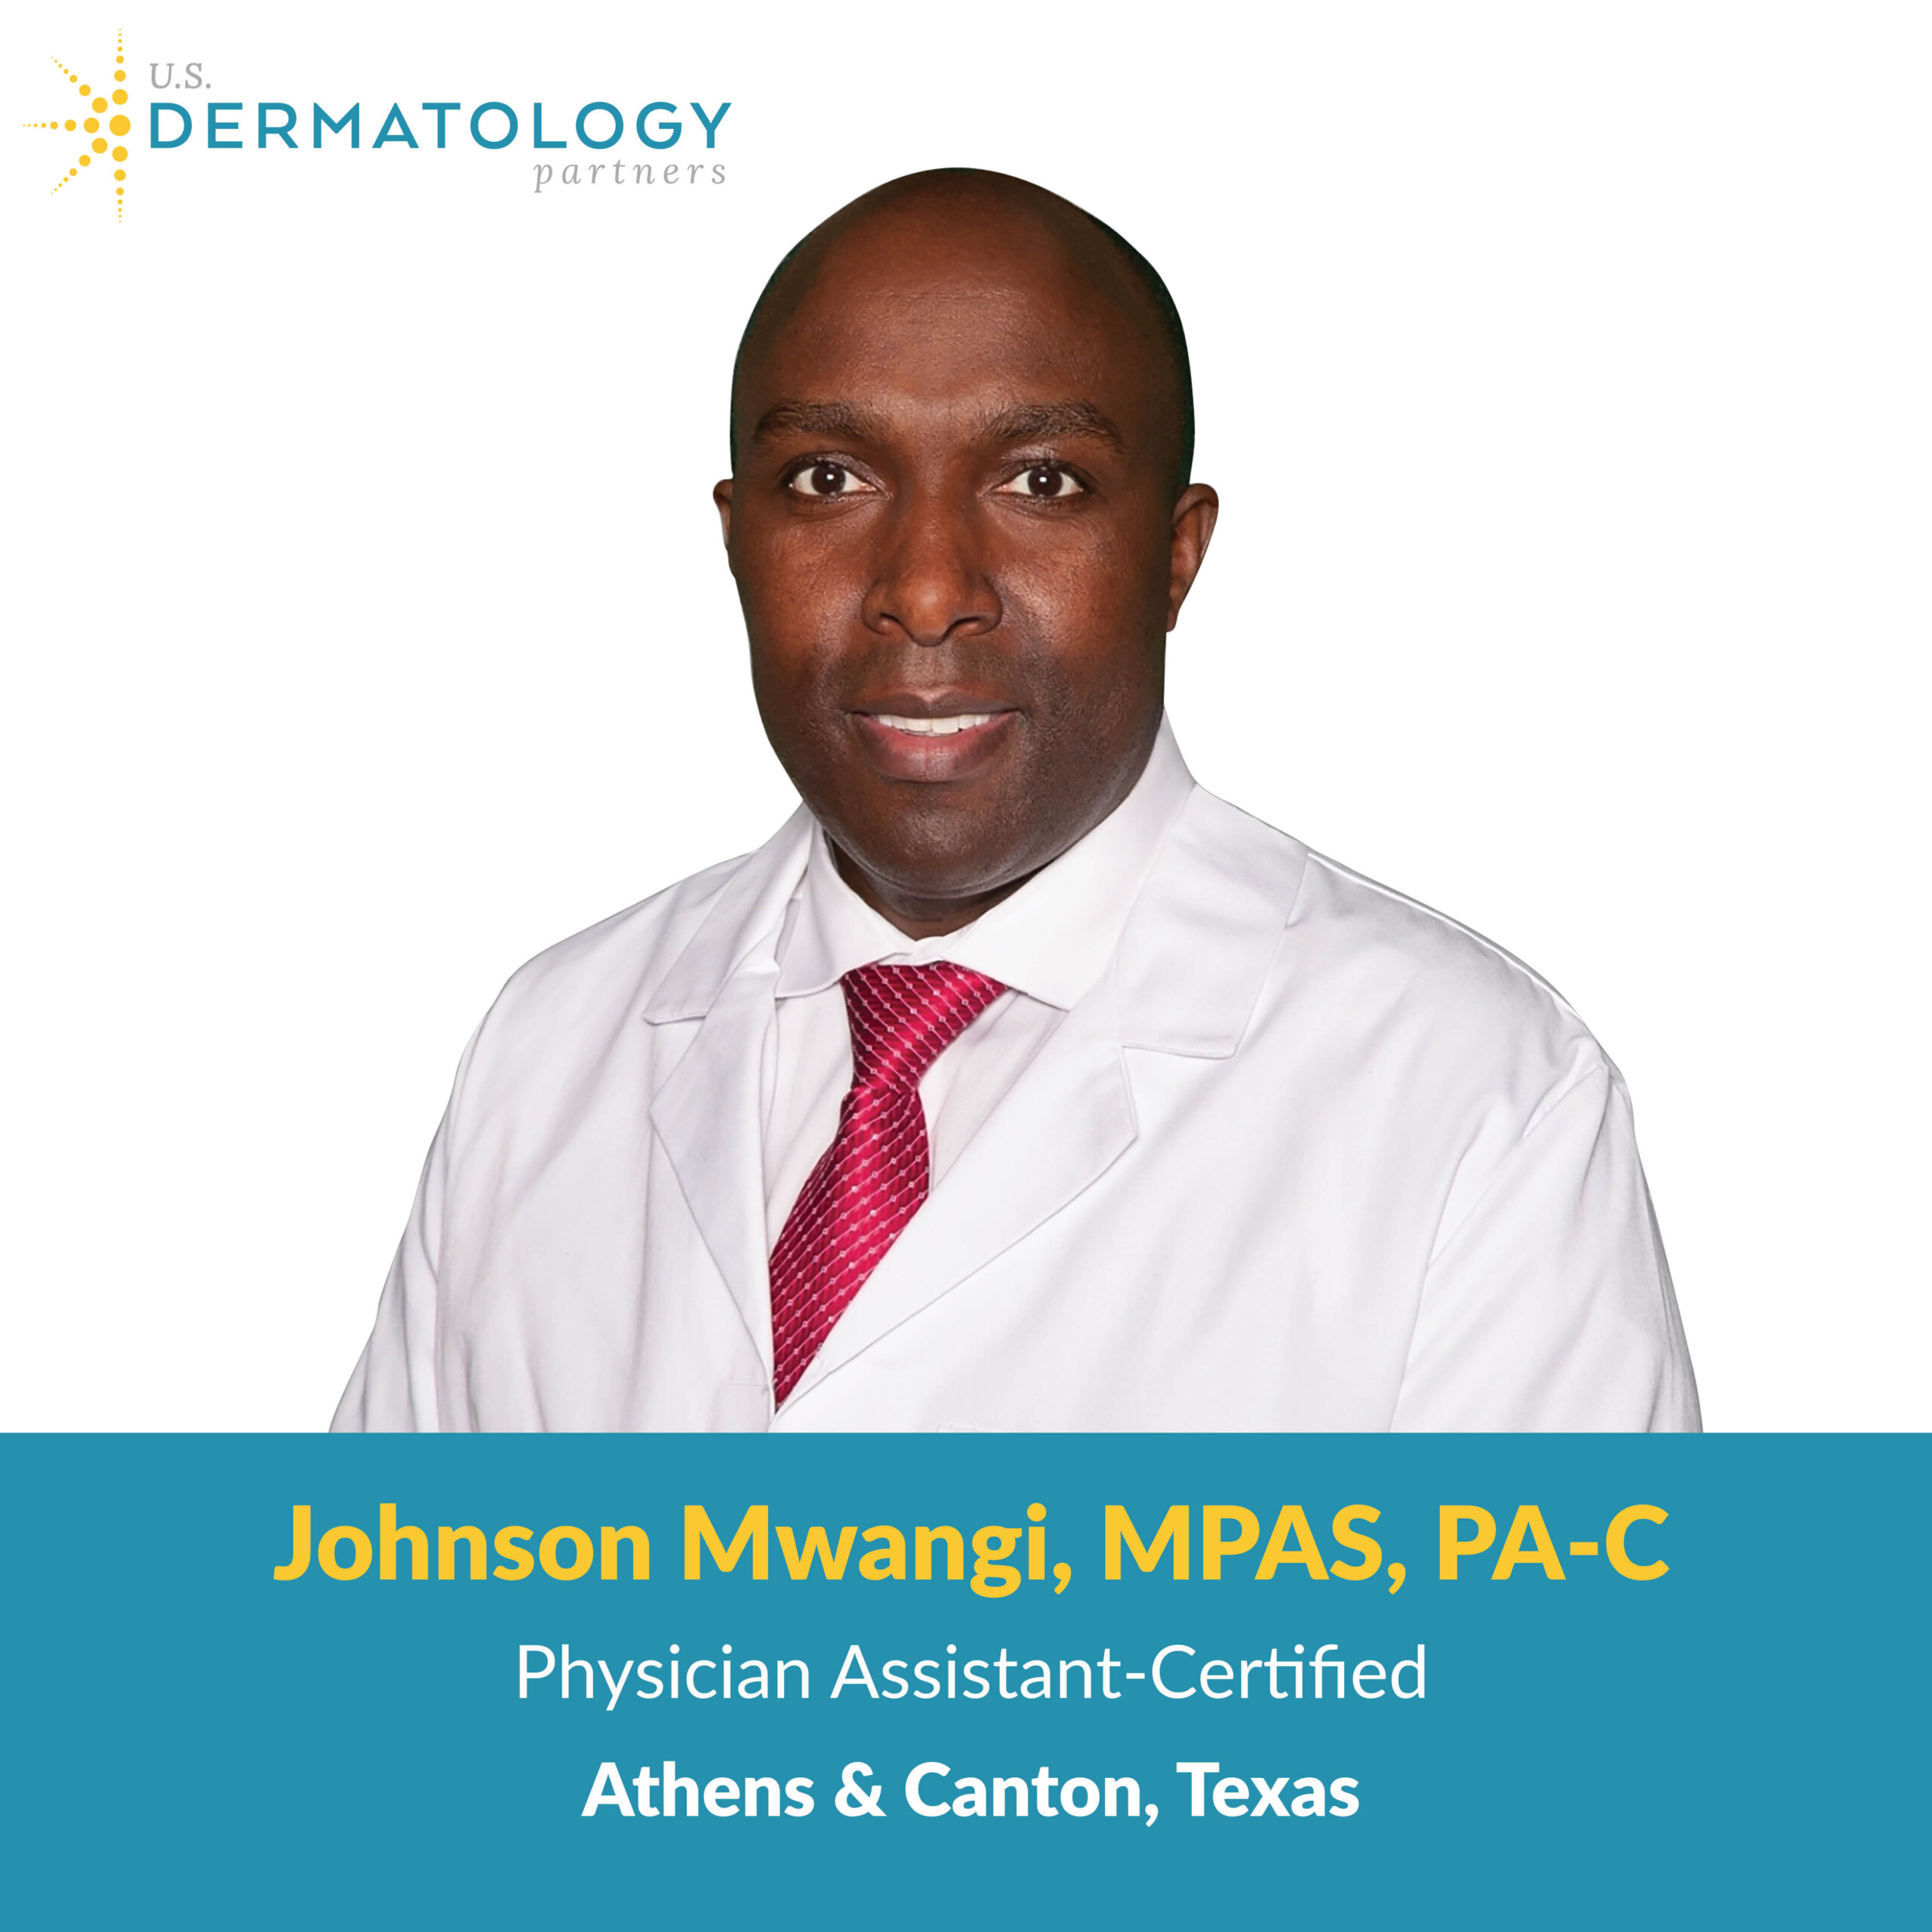 Johnson Mwangi, PA-C is a certified physician assistant providing dermatology skin care services to patients in Athens, Texas.